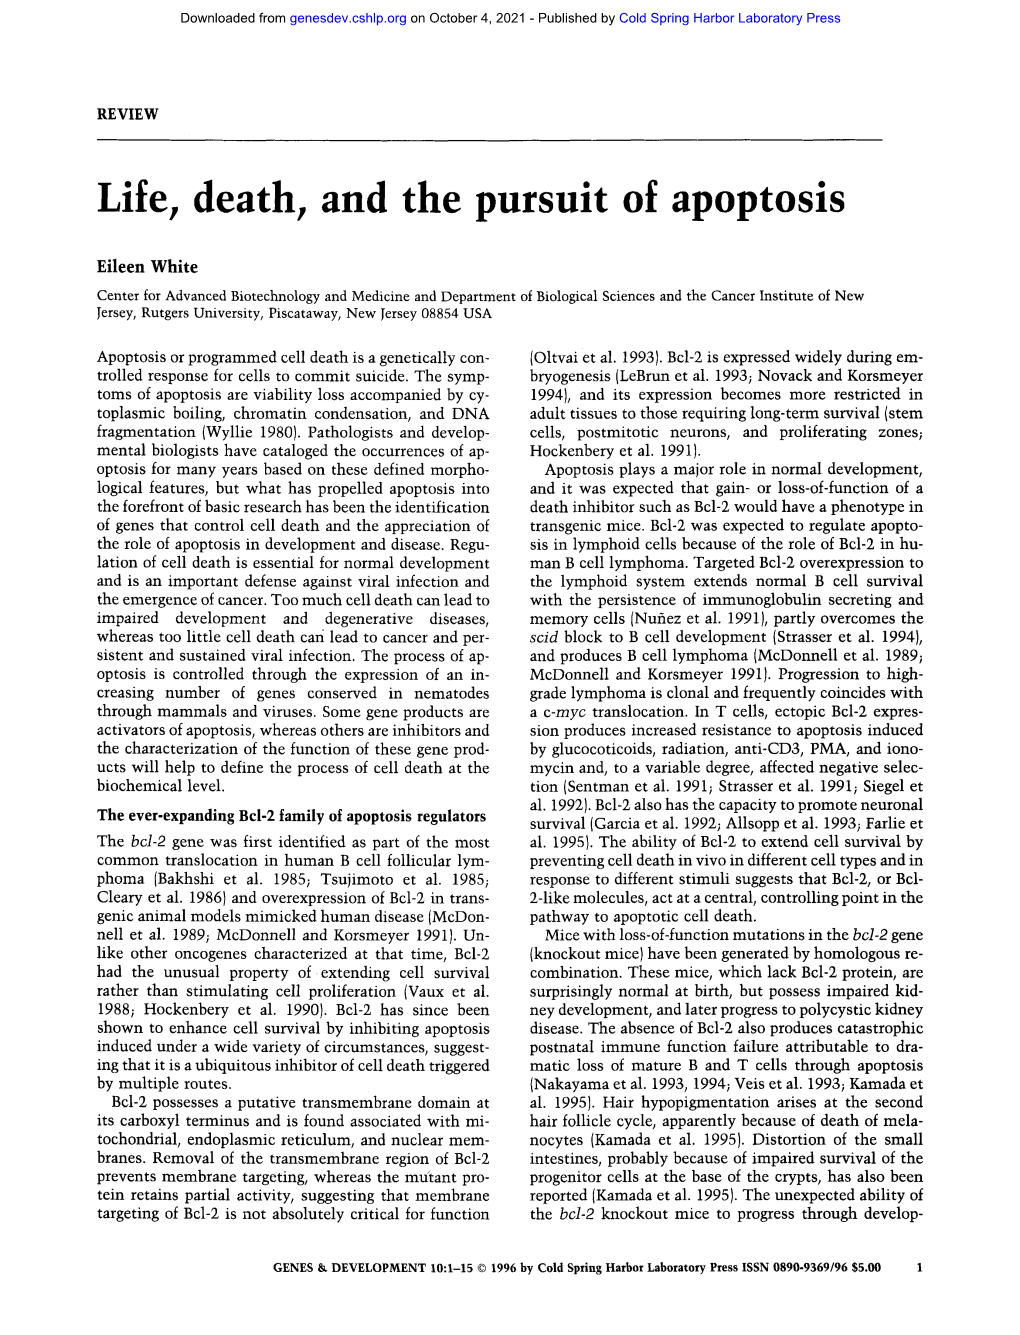 Life, Death, and the Pursuit of Apoptosis